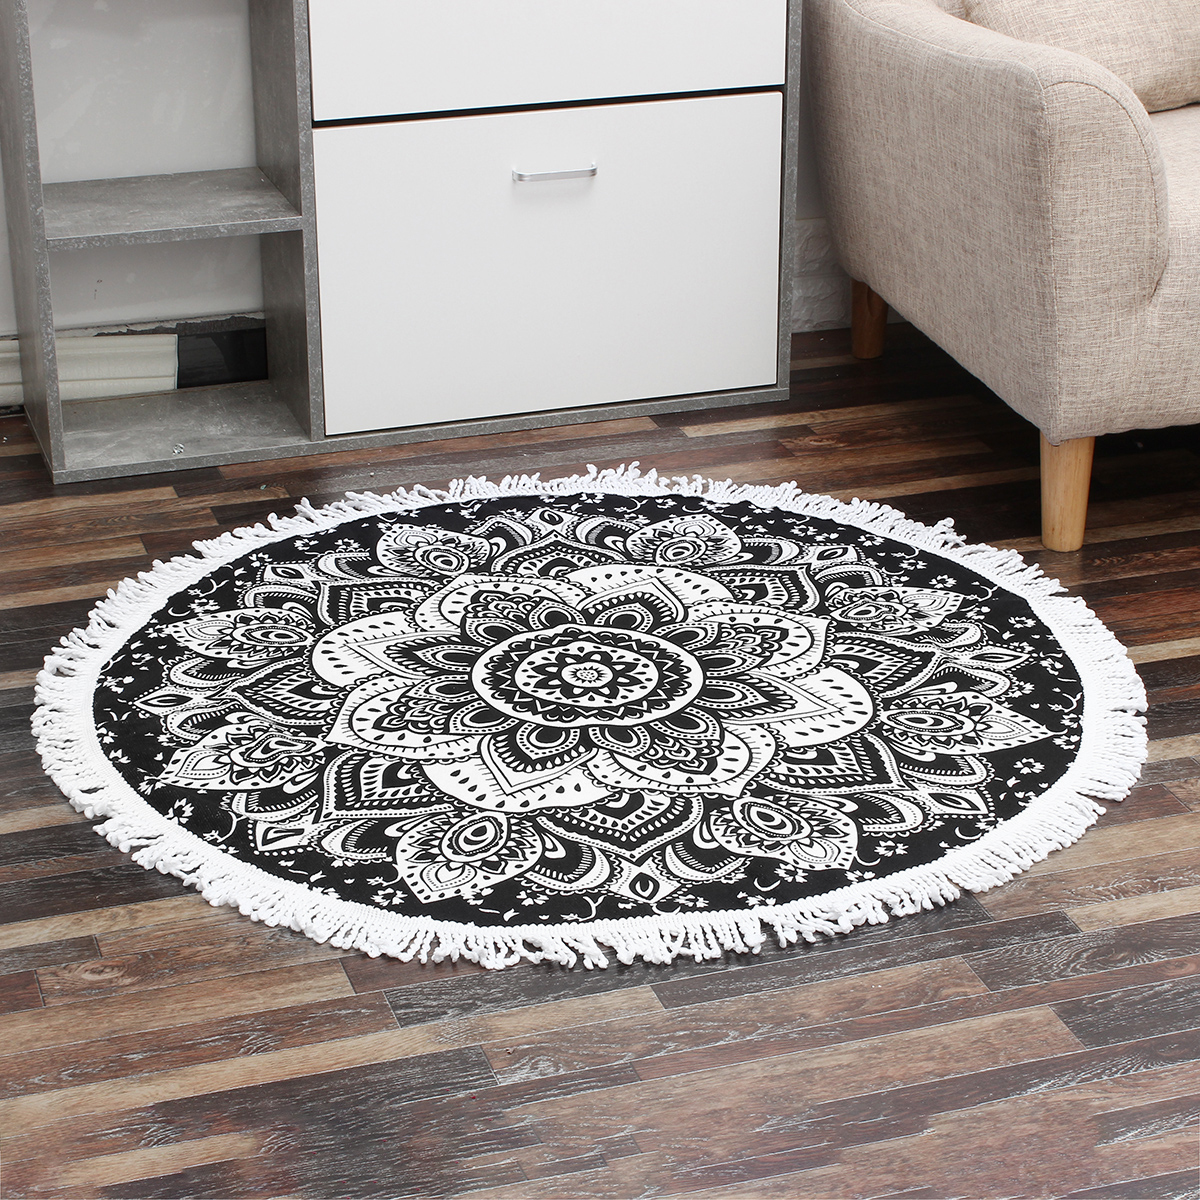 1M15M-Round-Beach-Towel-Tassel-Tapestry-Yoga-Mats-Blankets-Home-Fitness-Decoration-Accessories-1678169-17